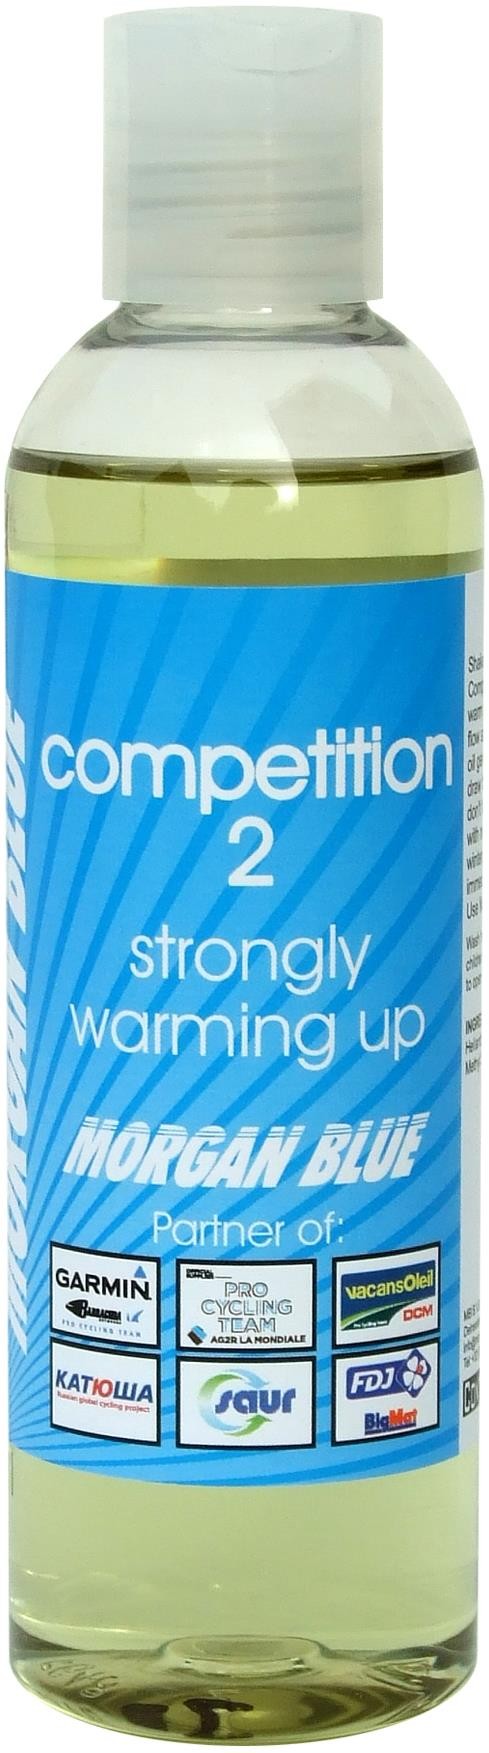 Competition 2 Massage Oil image 0